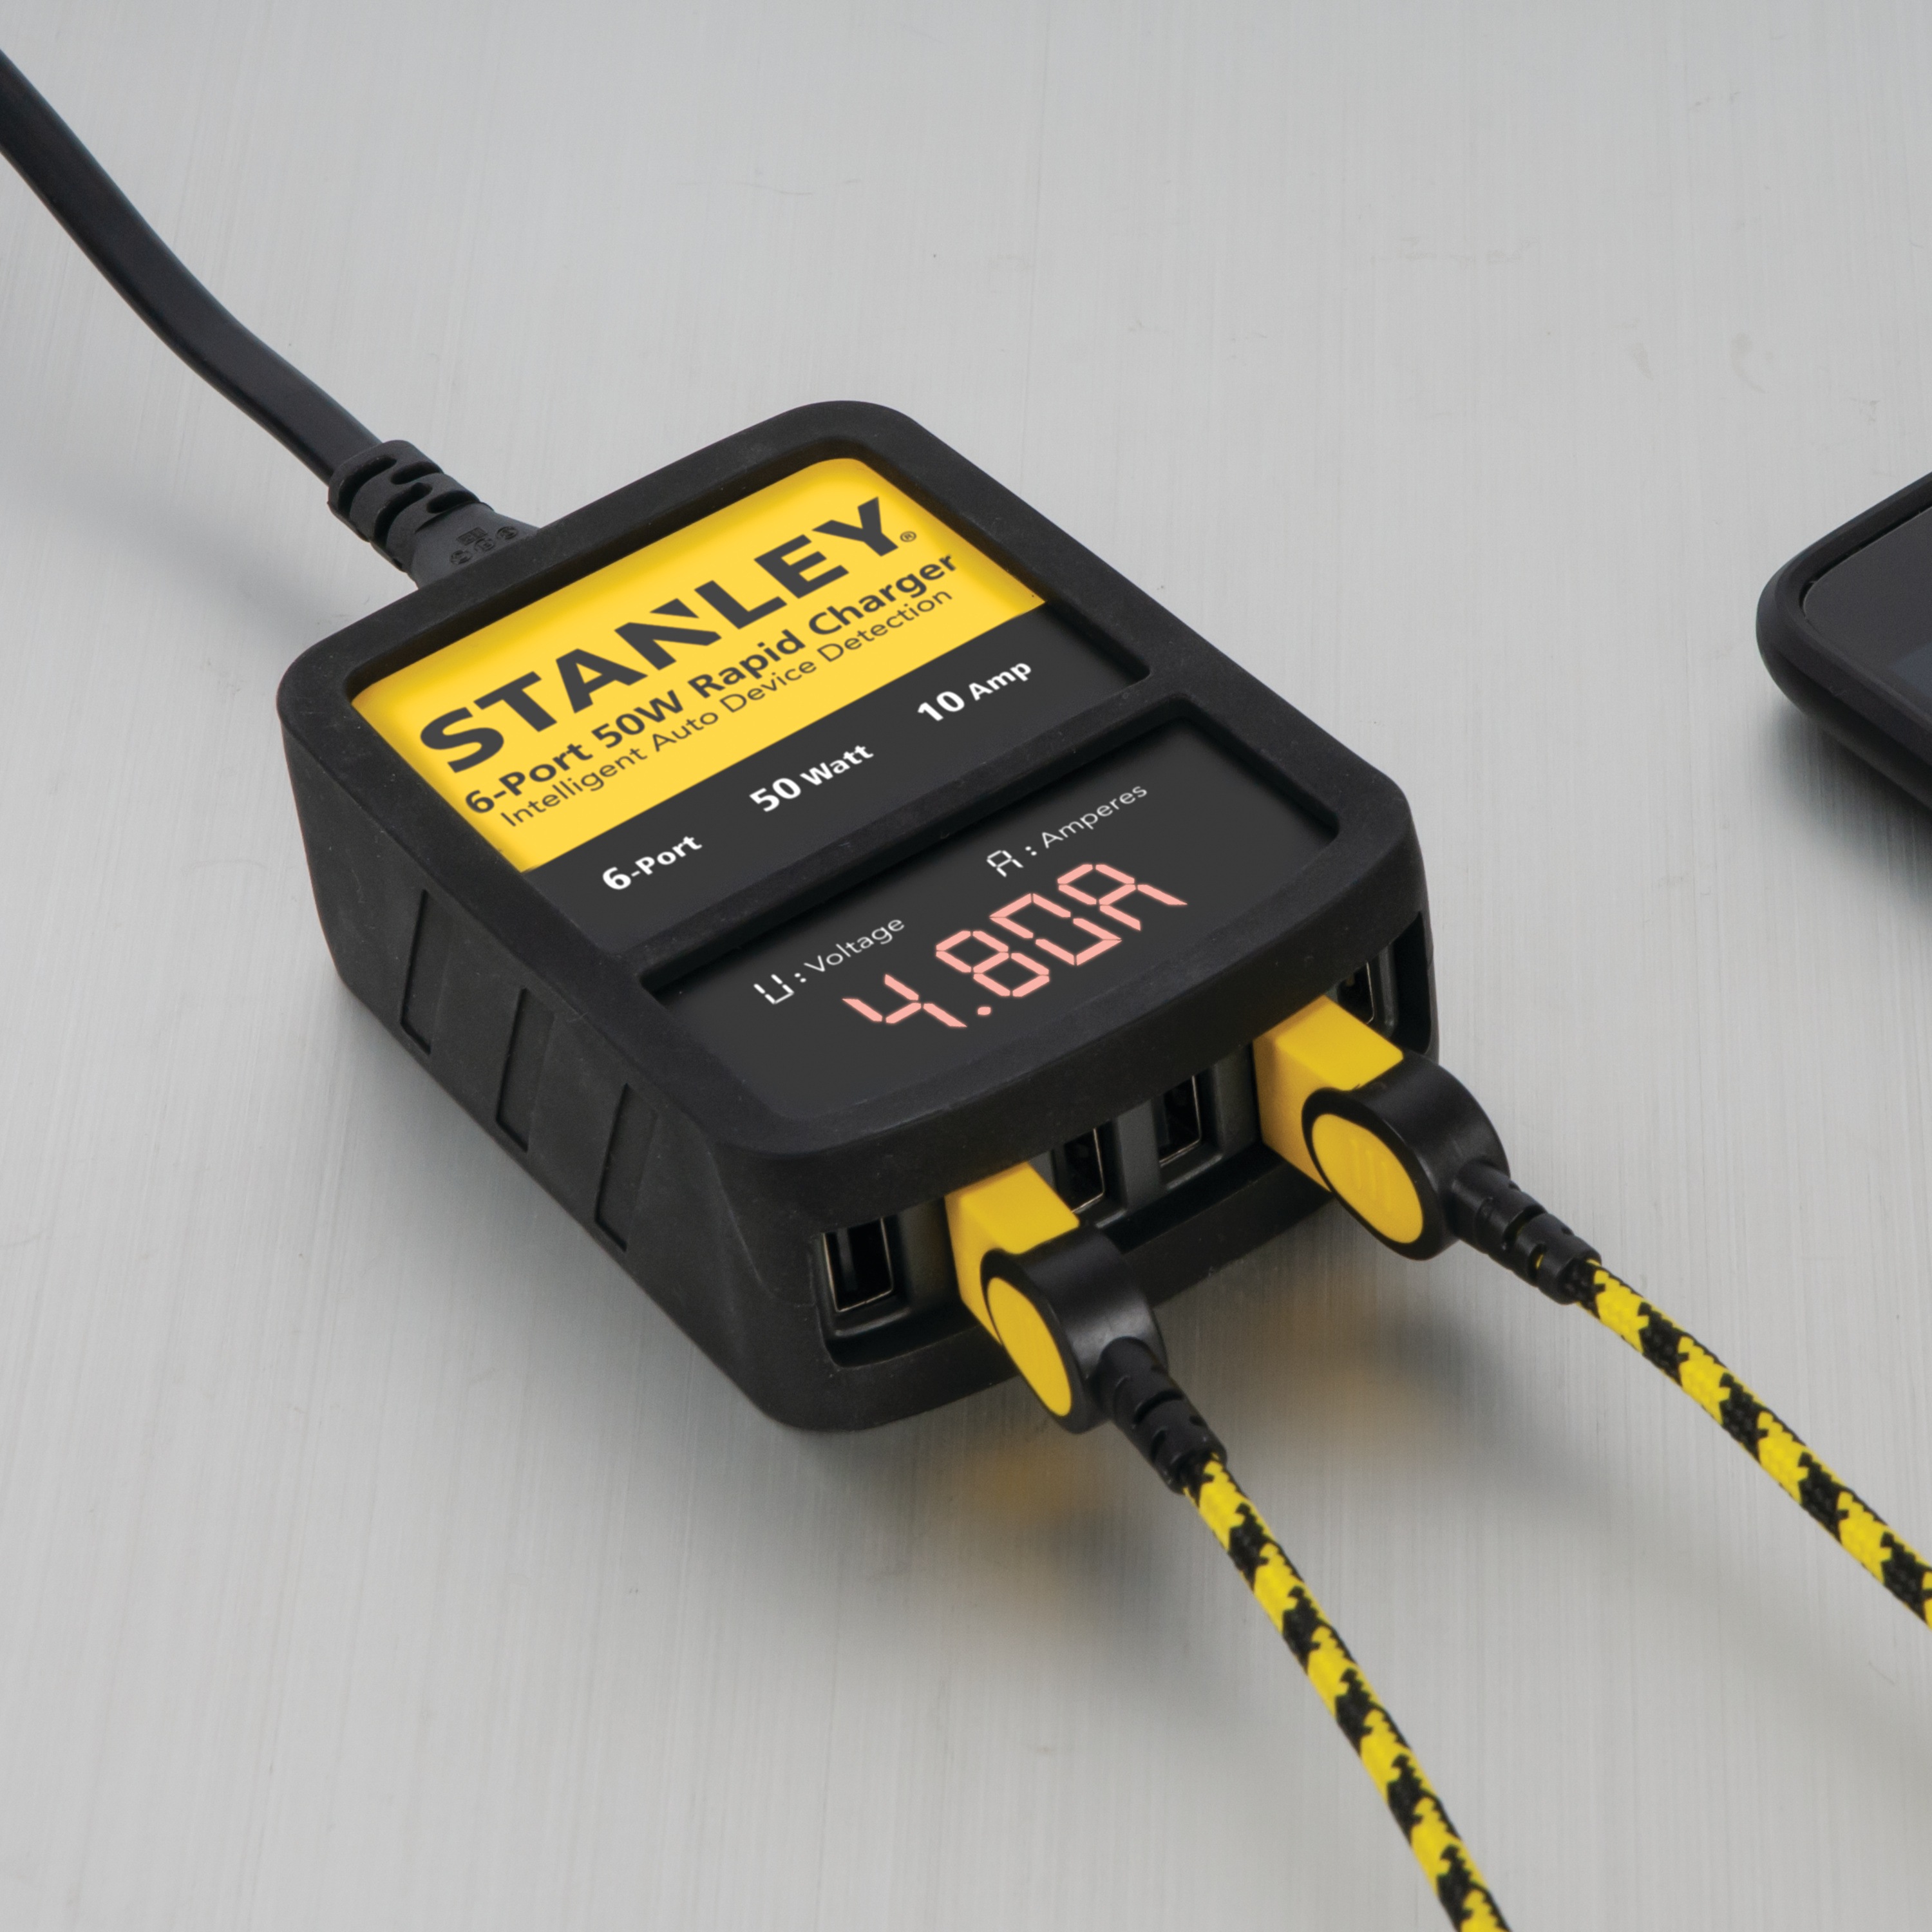 Stanley Tools - 50W Rapid USB Wall Chargerwith LED Readout - 1310811ST2